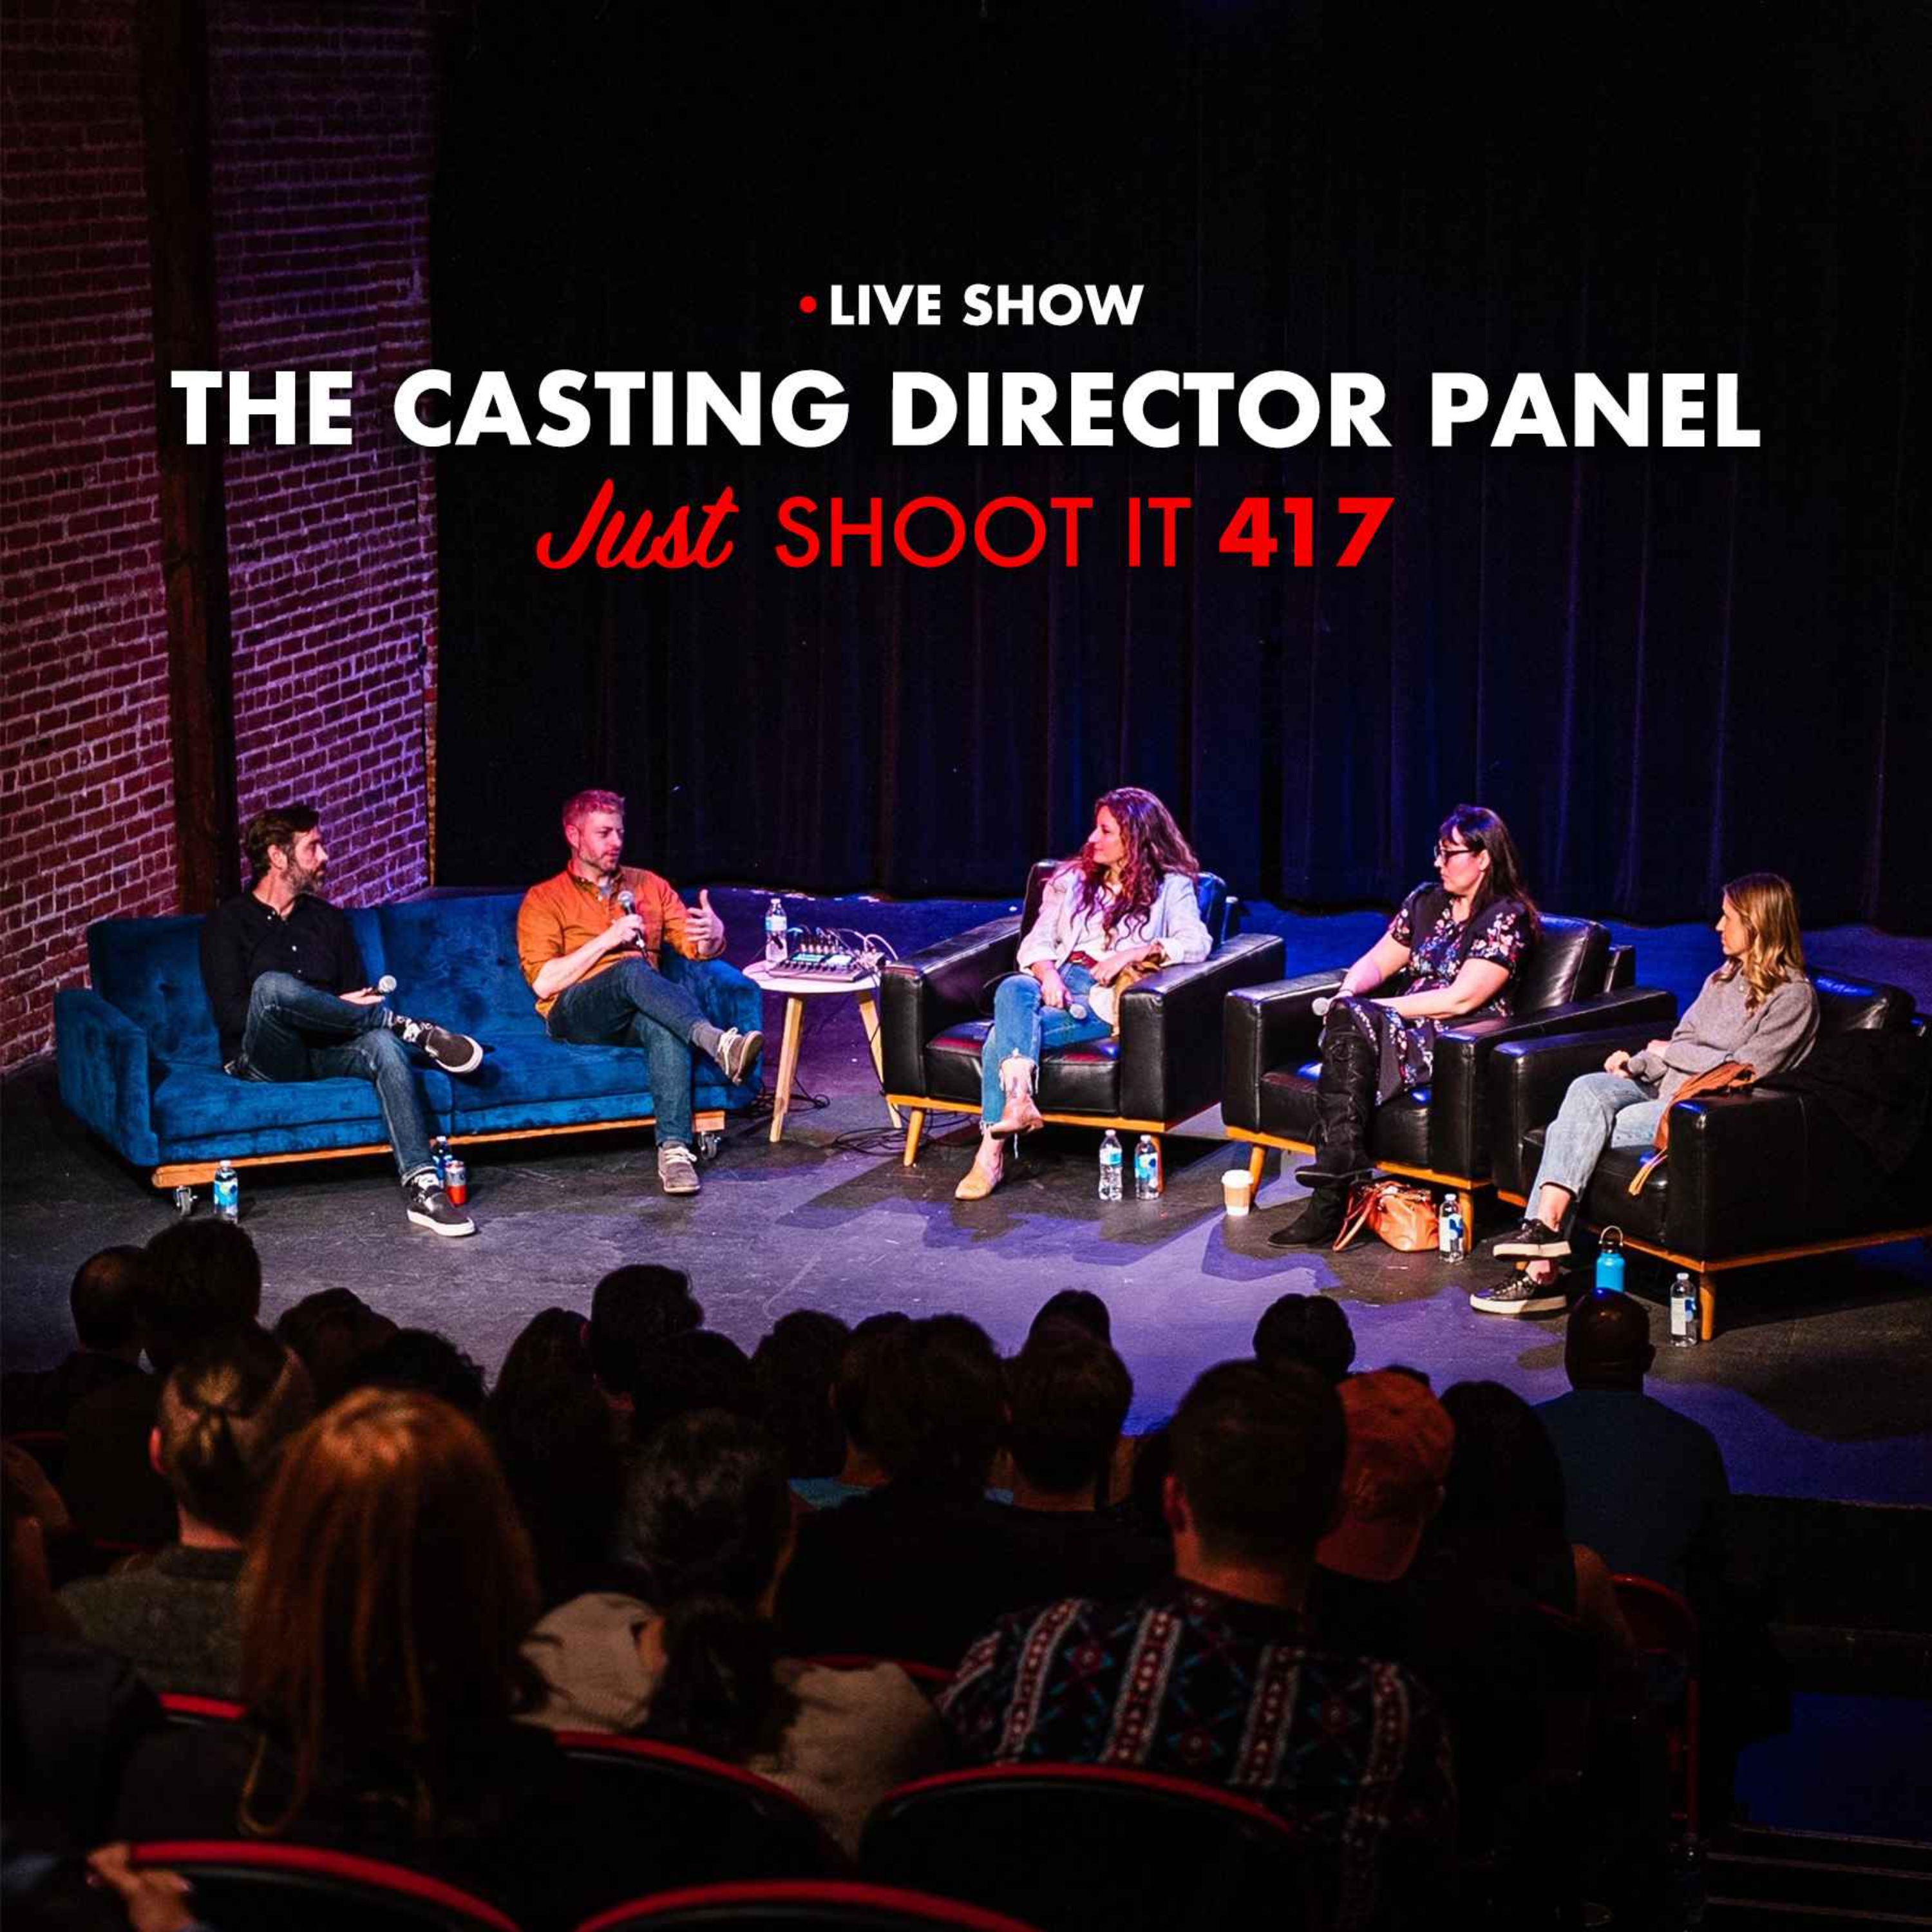 The Casting Director Panel - Just Shoot It 417